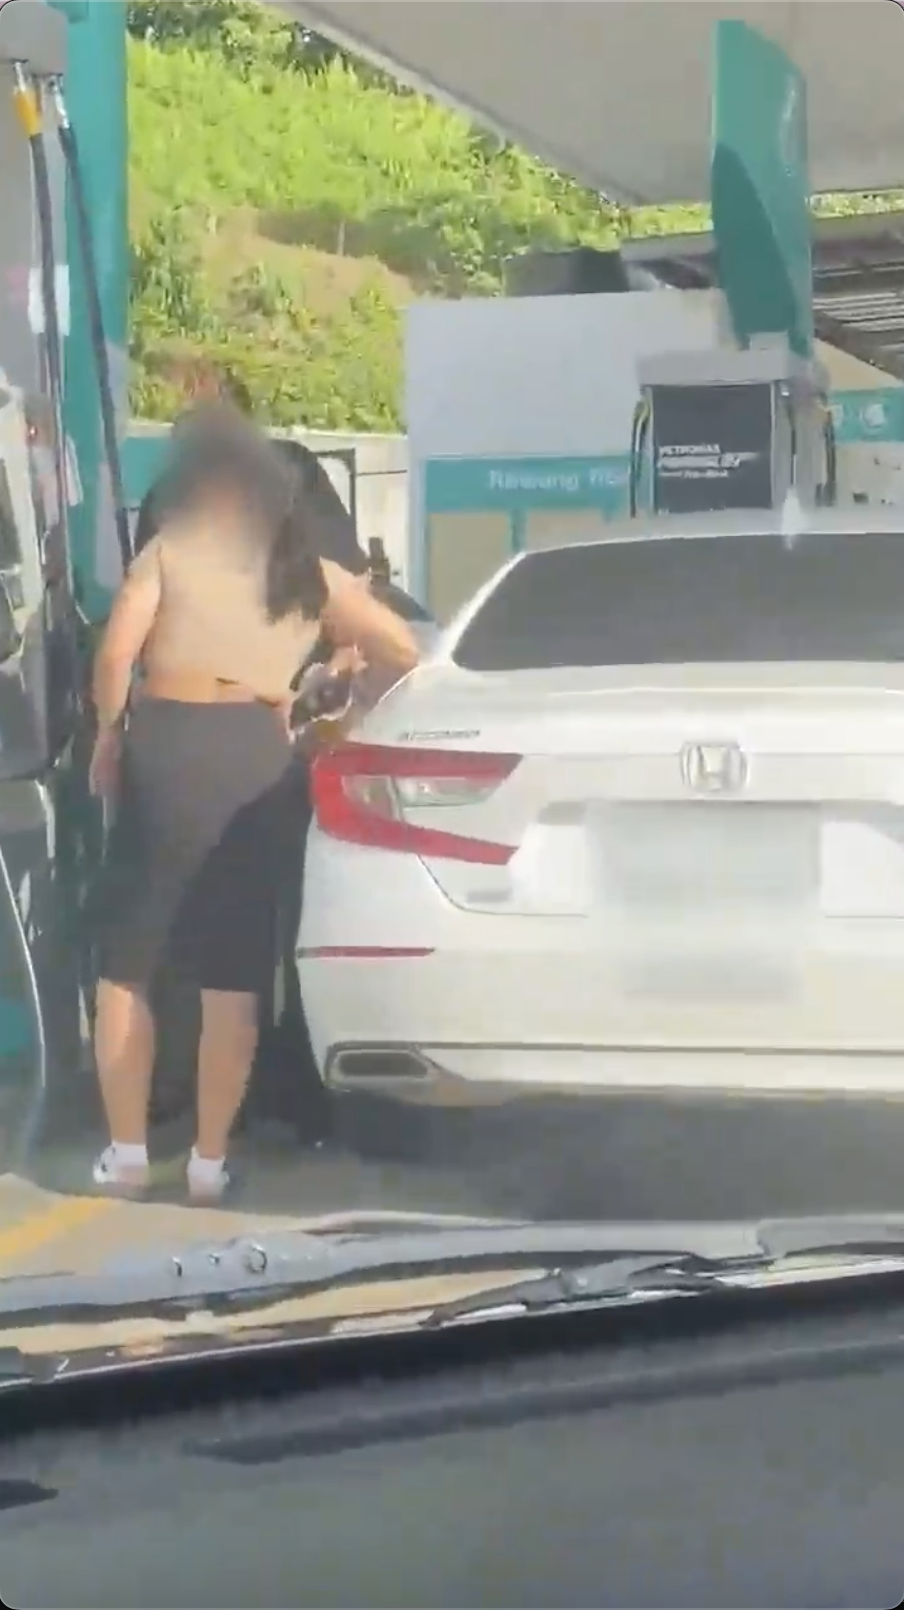 Couple with thai registered car pumping ron95 petrol